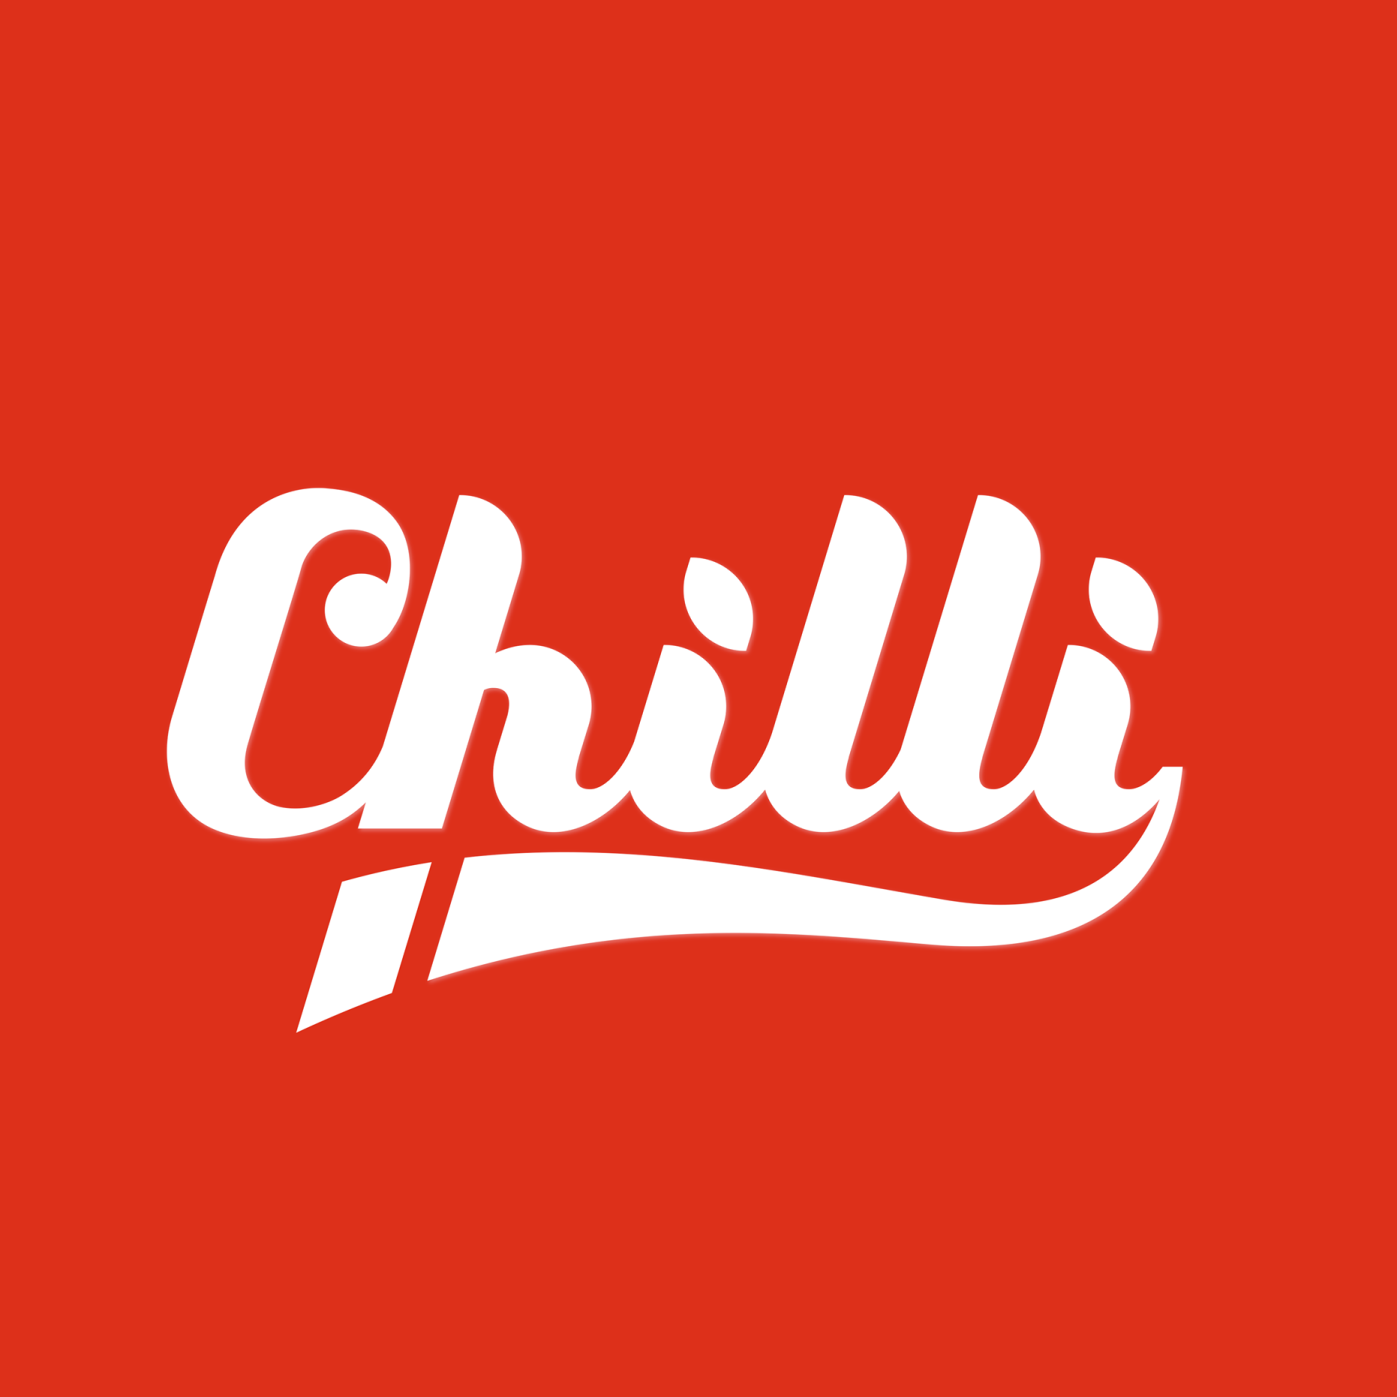 CHILLI DEALS OÜ - Agents involved in the sale of a variety of goods in Tallinn